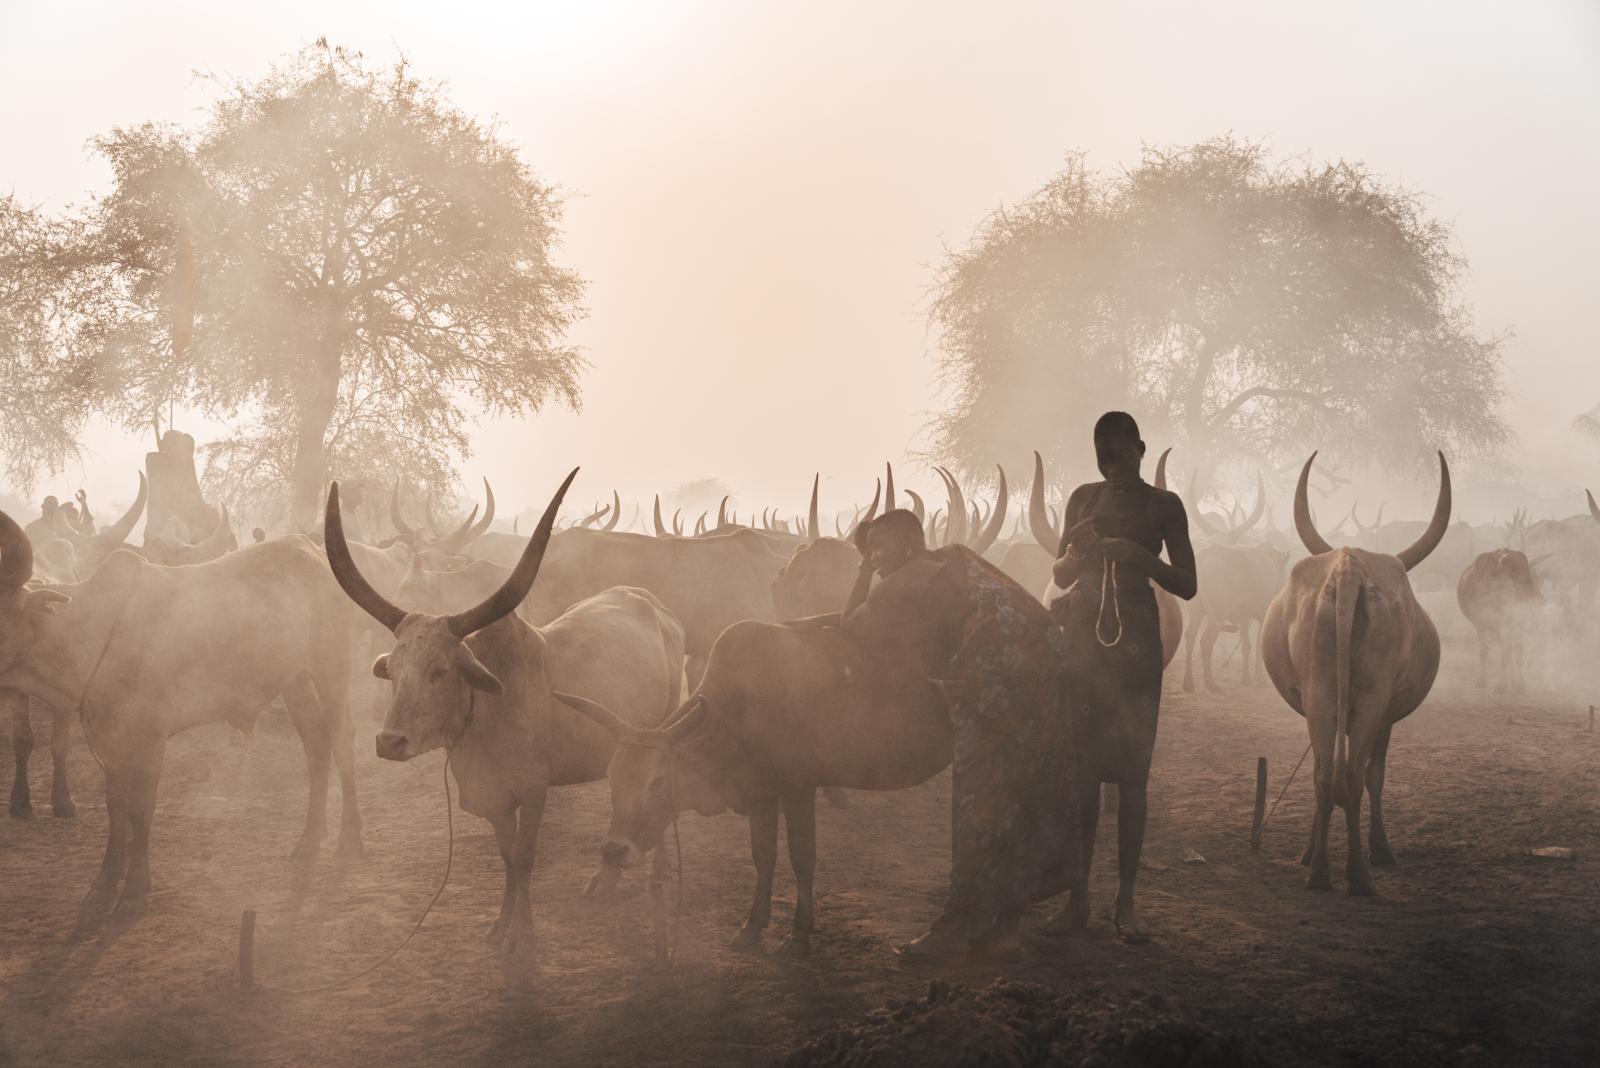  "Eco-Warriors of the Grasslands: The Sustainable Lifestyle of the Mundari Tribe"